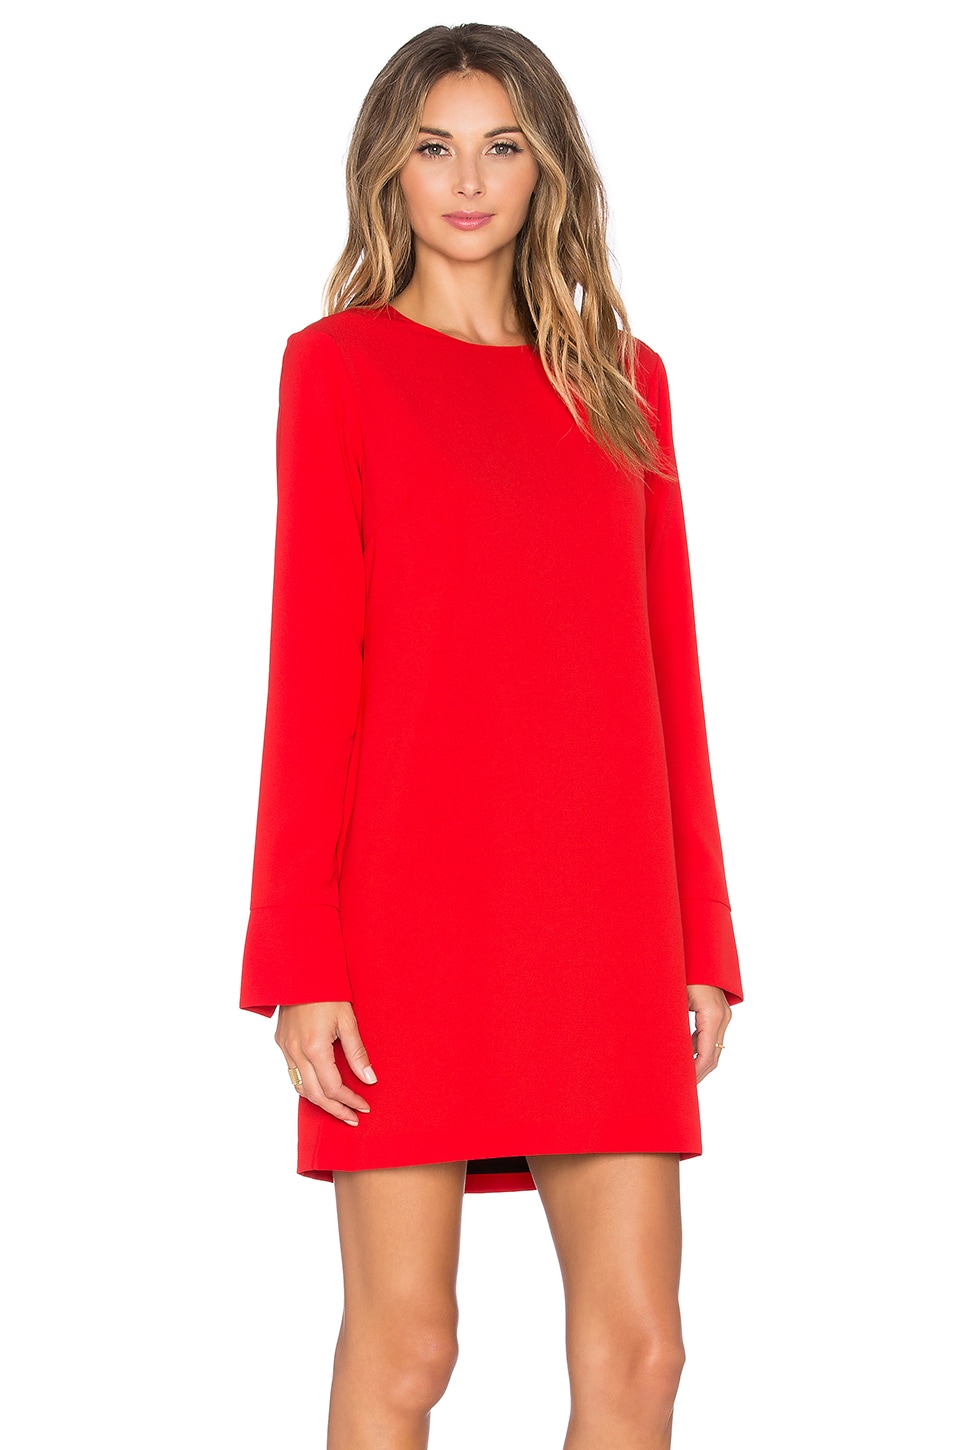 WAYF Cutout Back Long Sleeve Dress in Red | REVOLVE